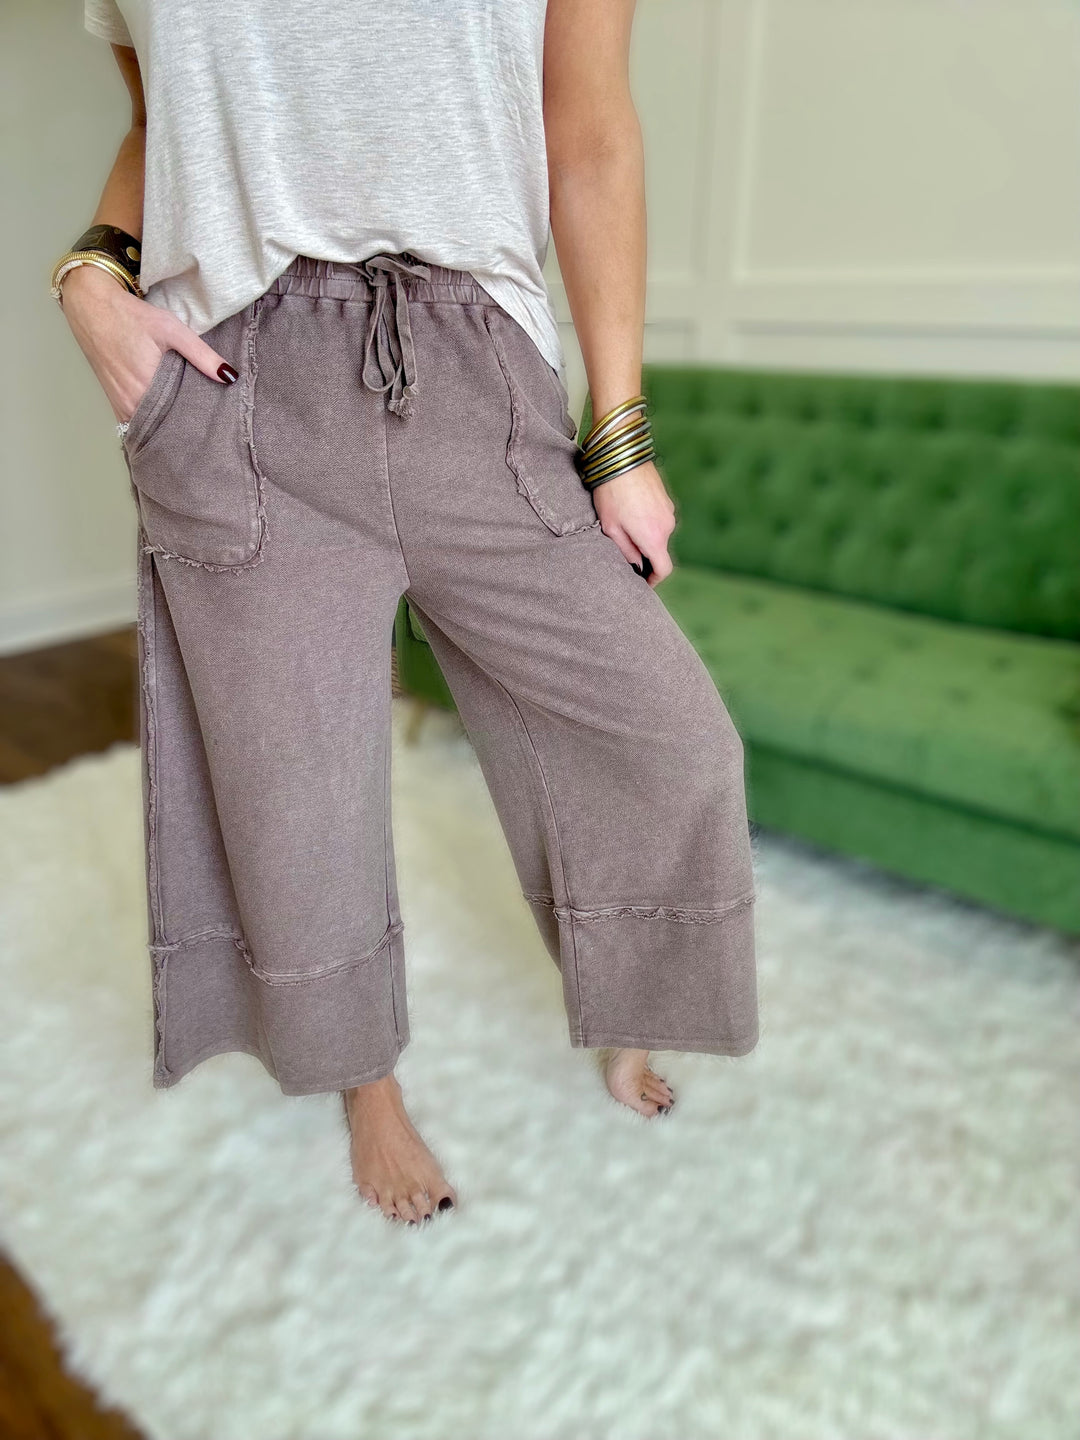 The Comfy Days Mineral Wash Pant